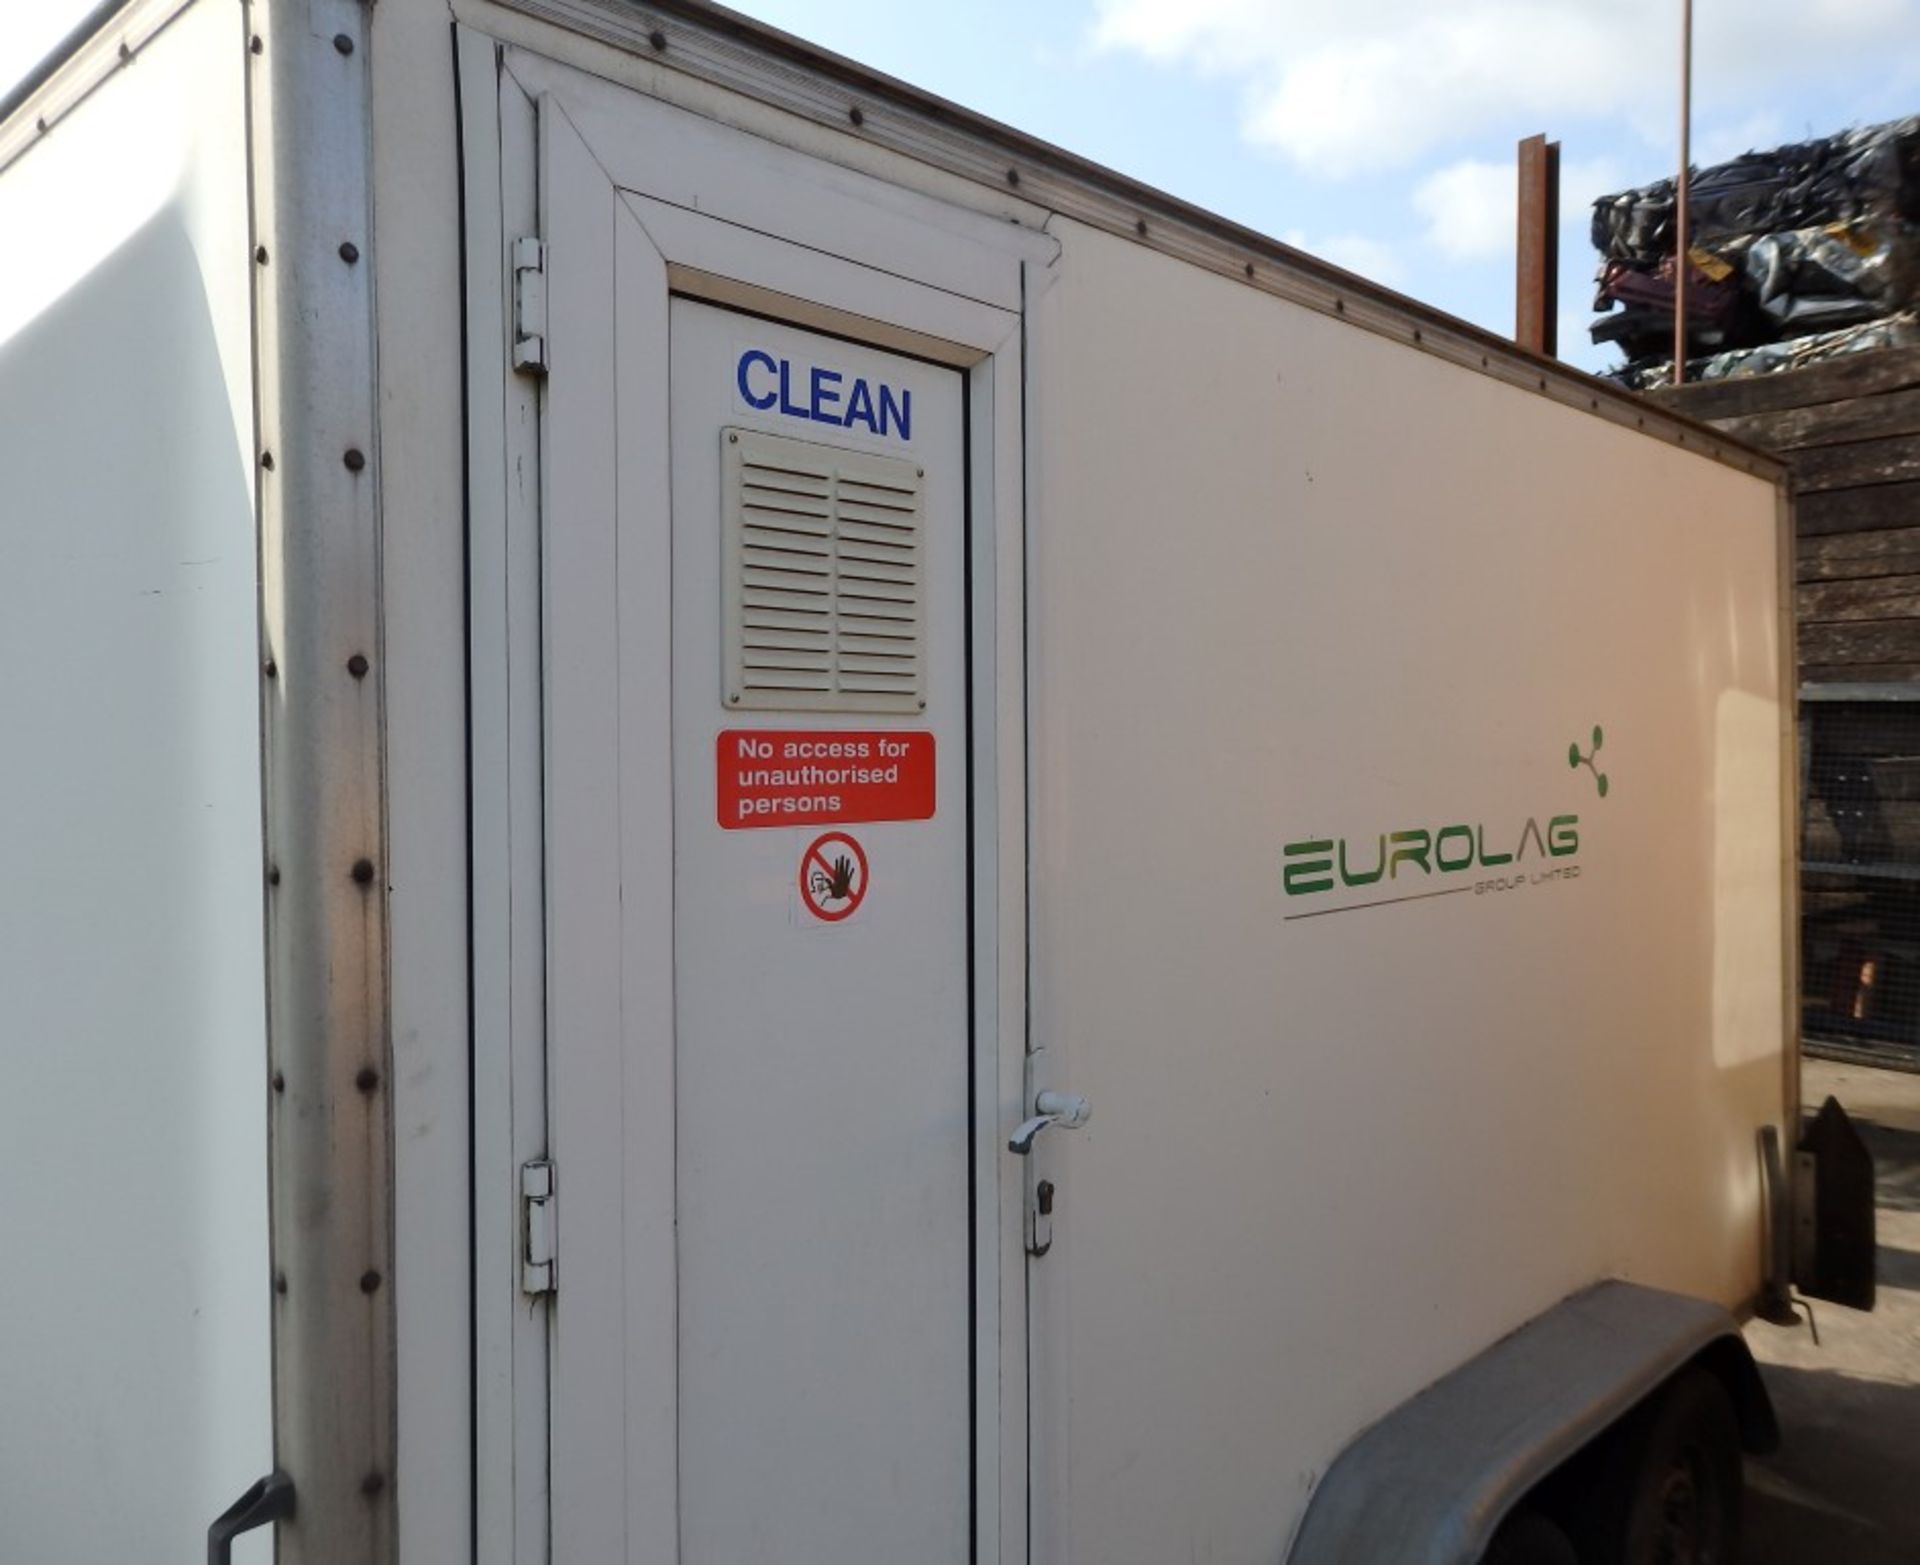 1 x Eurolag Towing Trailer With In and Out Shower Facility - Previously Used As Decontamination Wash - Image 10 of 31